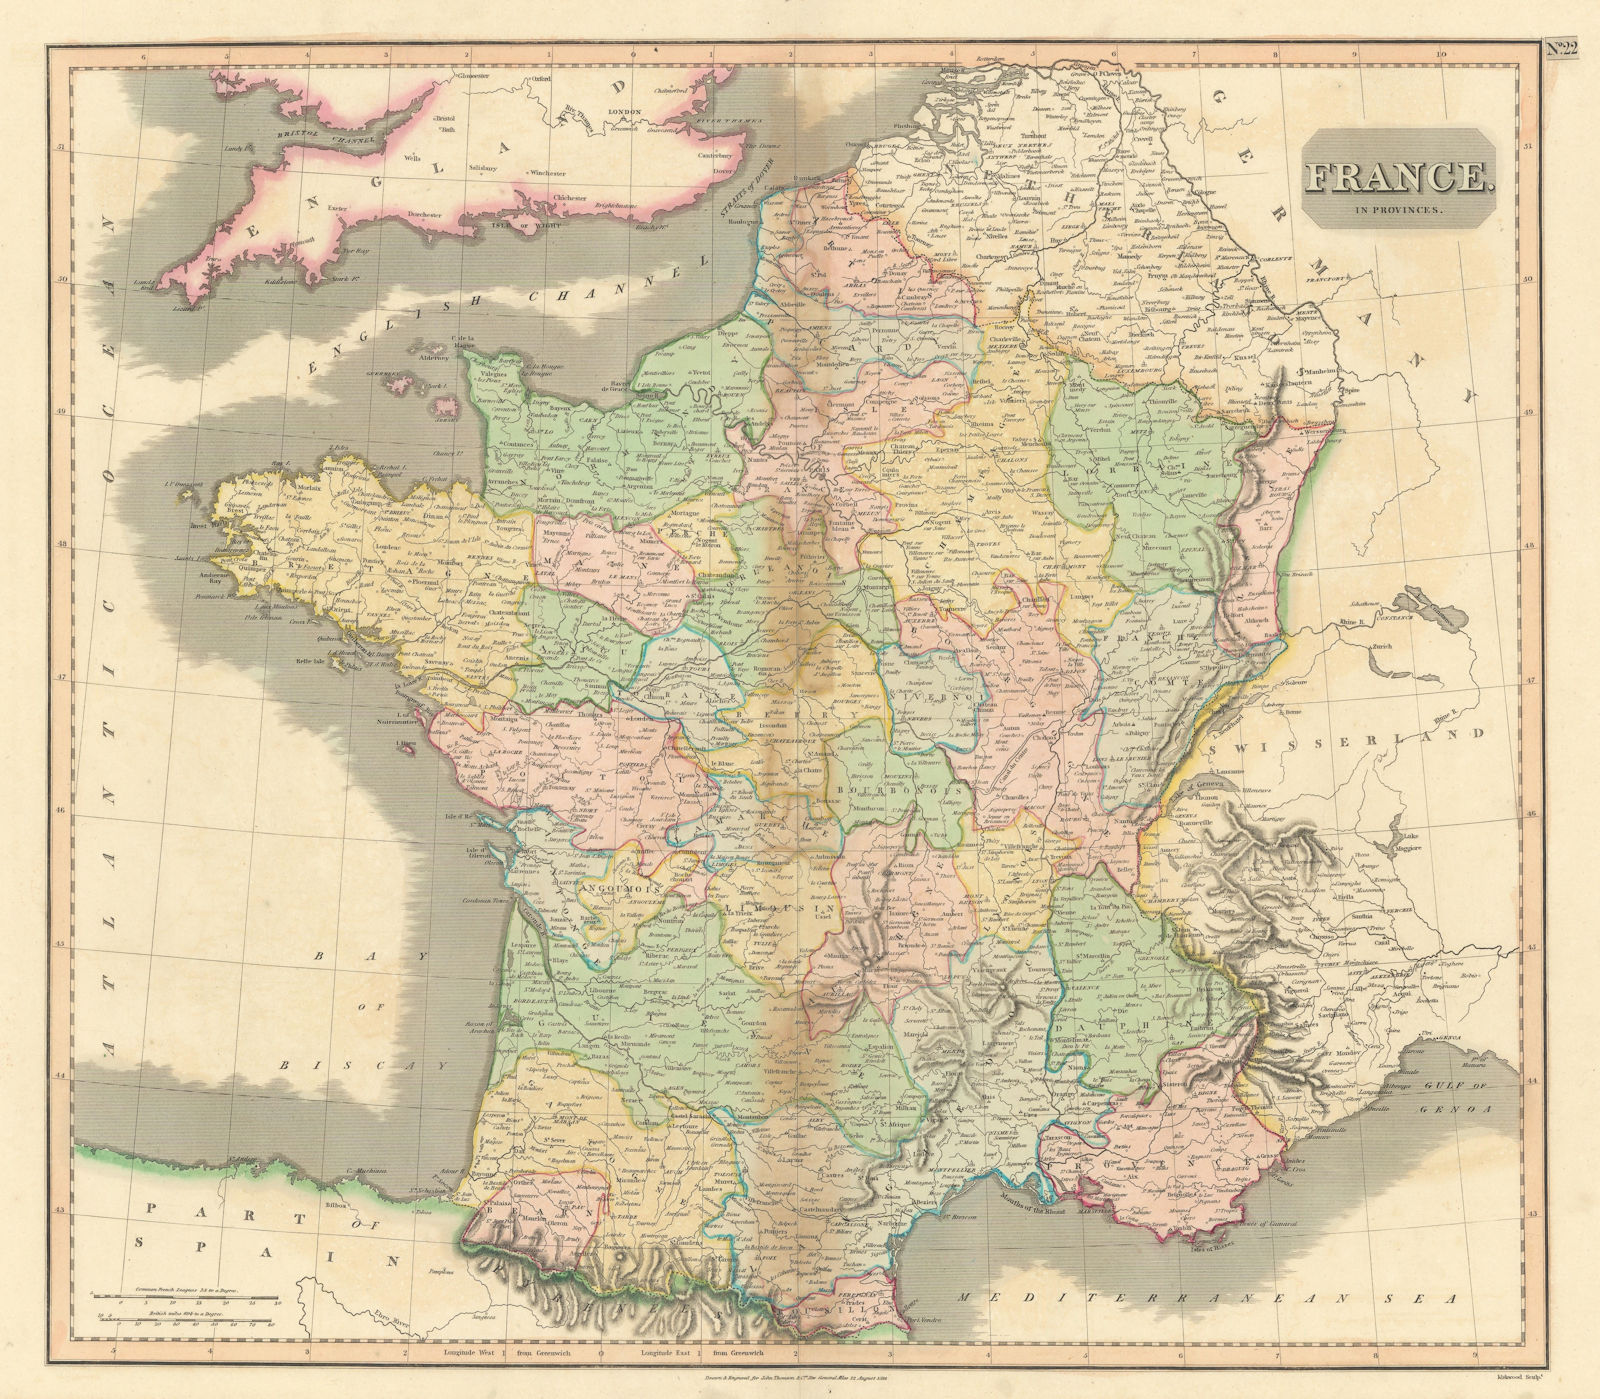 "France in provinces", before the Revolution, w/o Savoy & Nice. THOMSON 1817 map